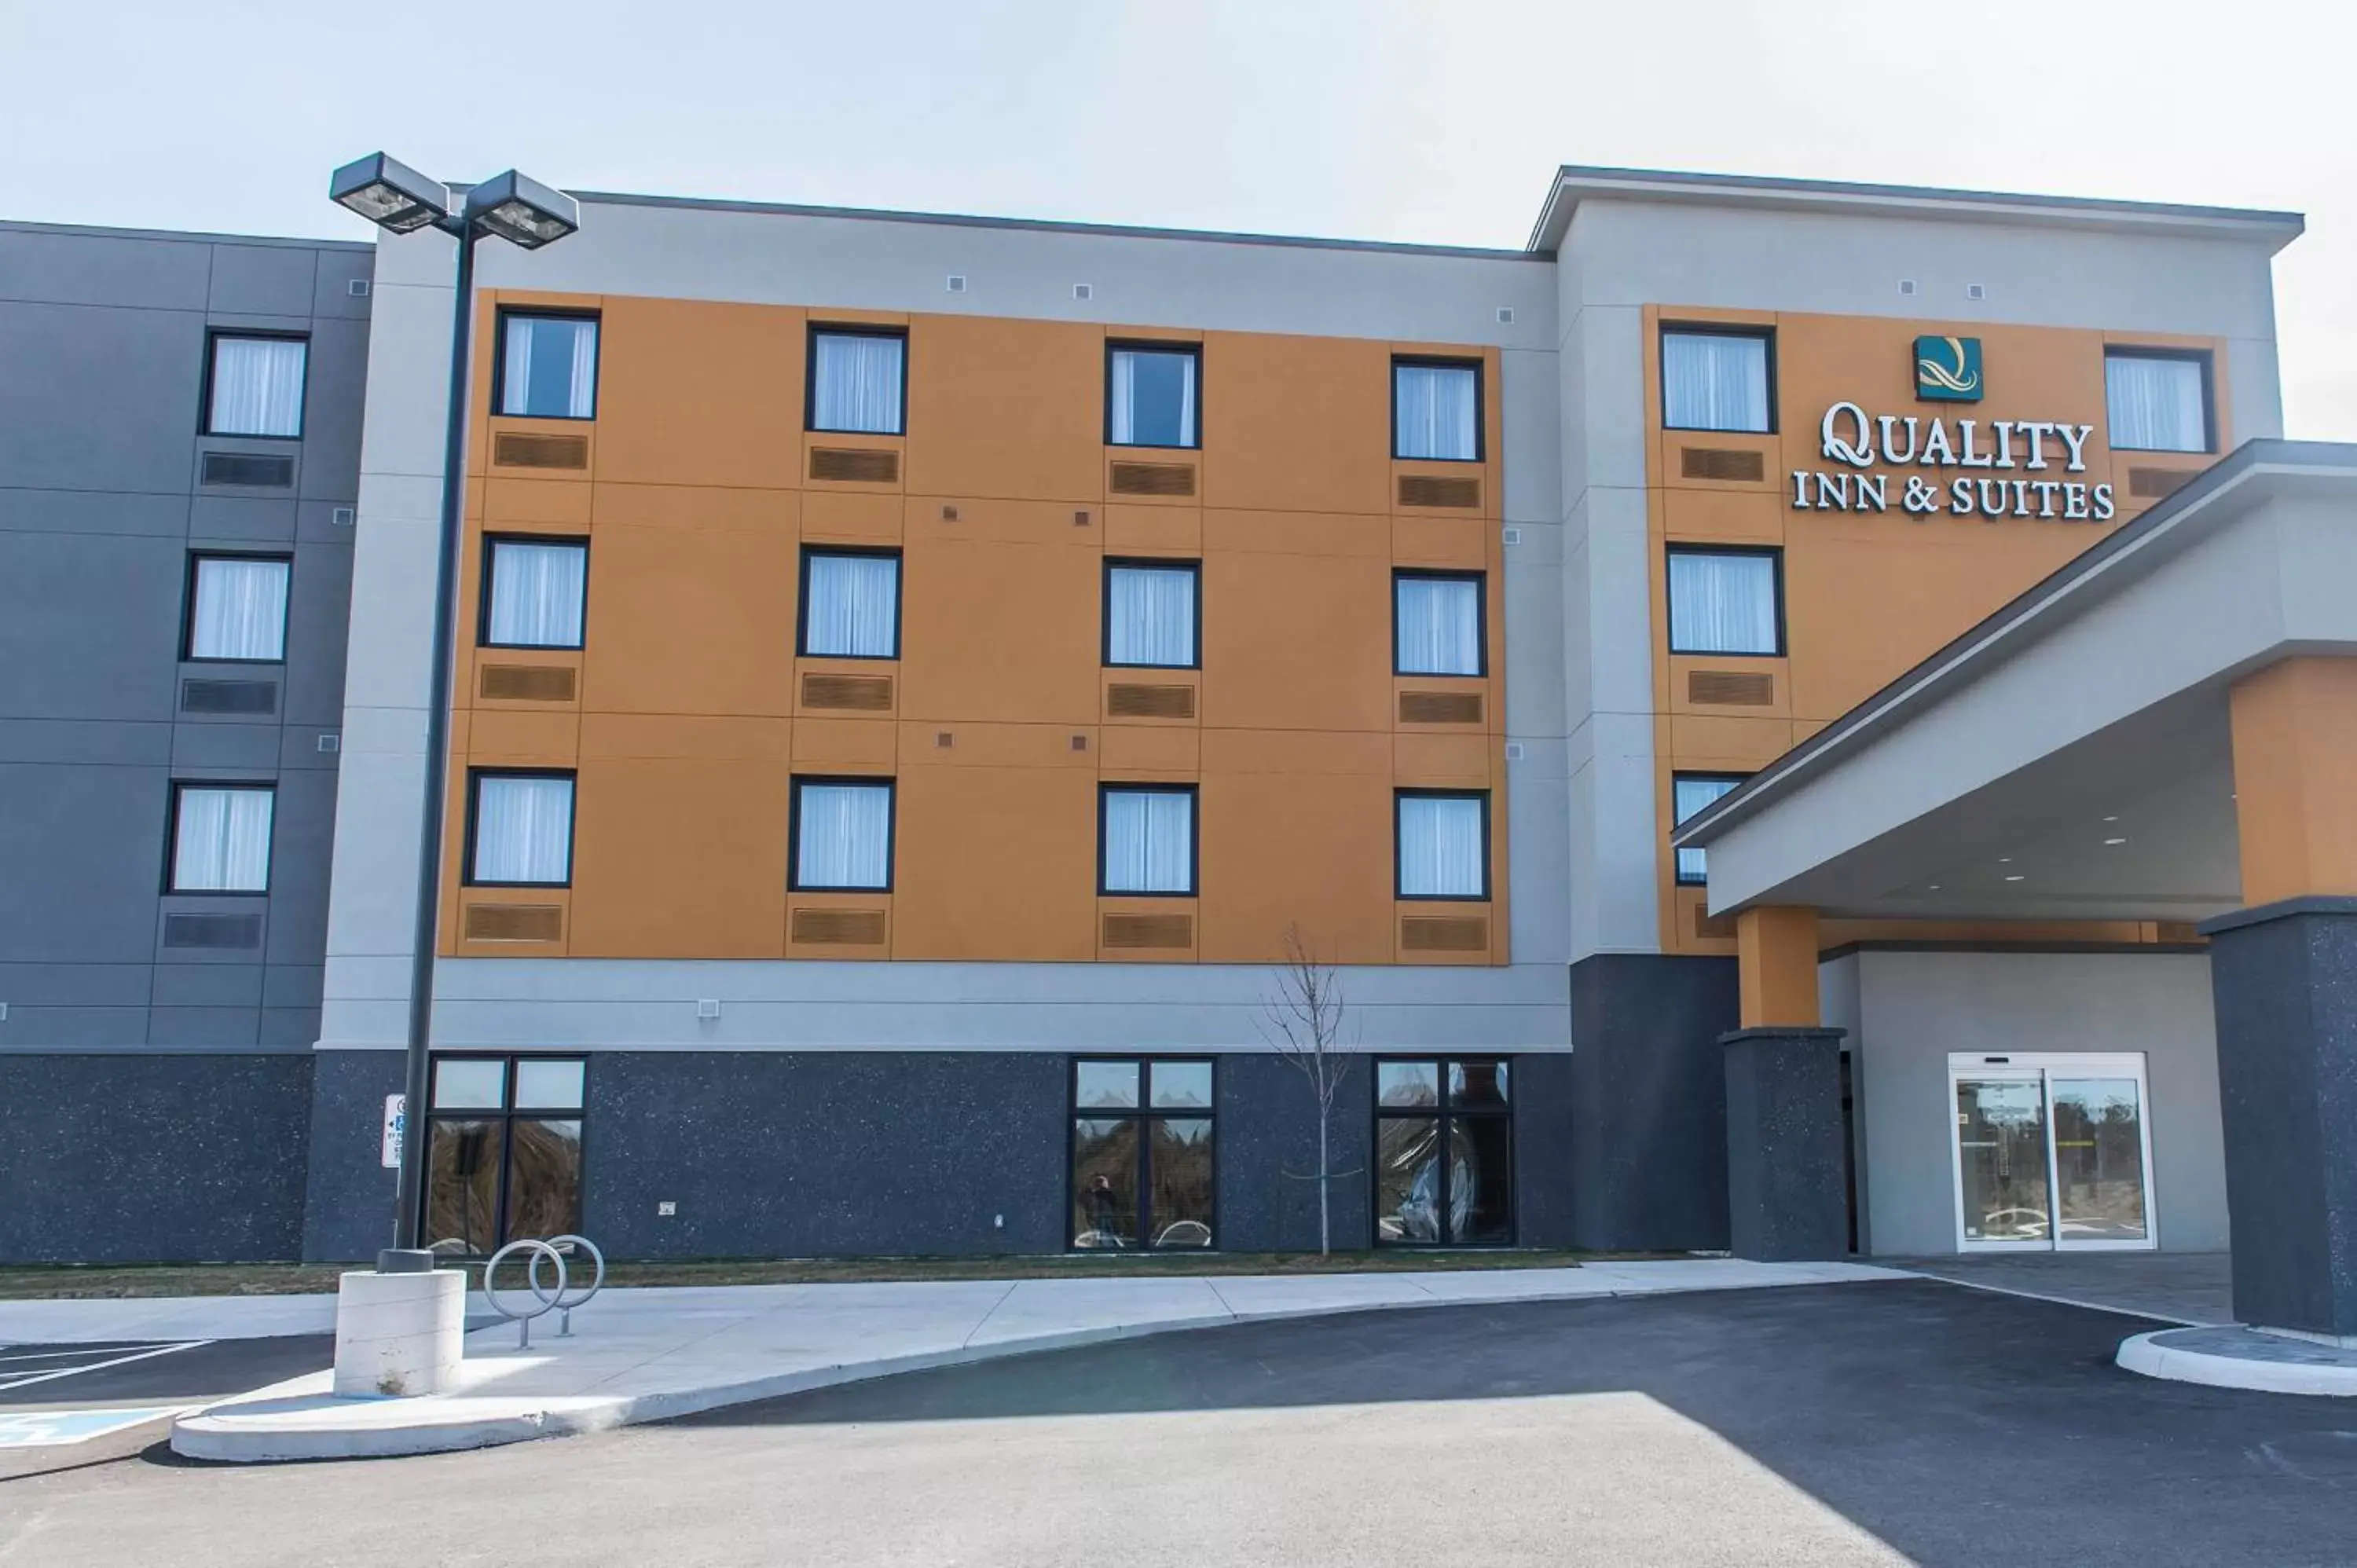 Facade/entrance, Property Building in Quality Inn & Suites Kingston